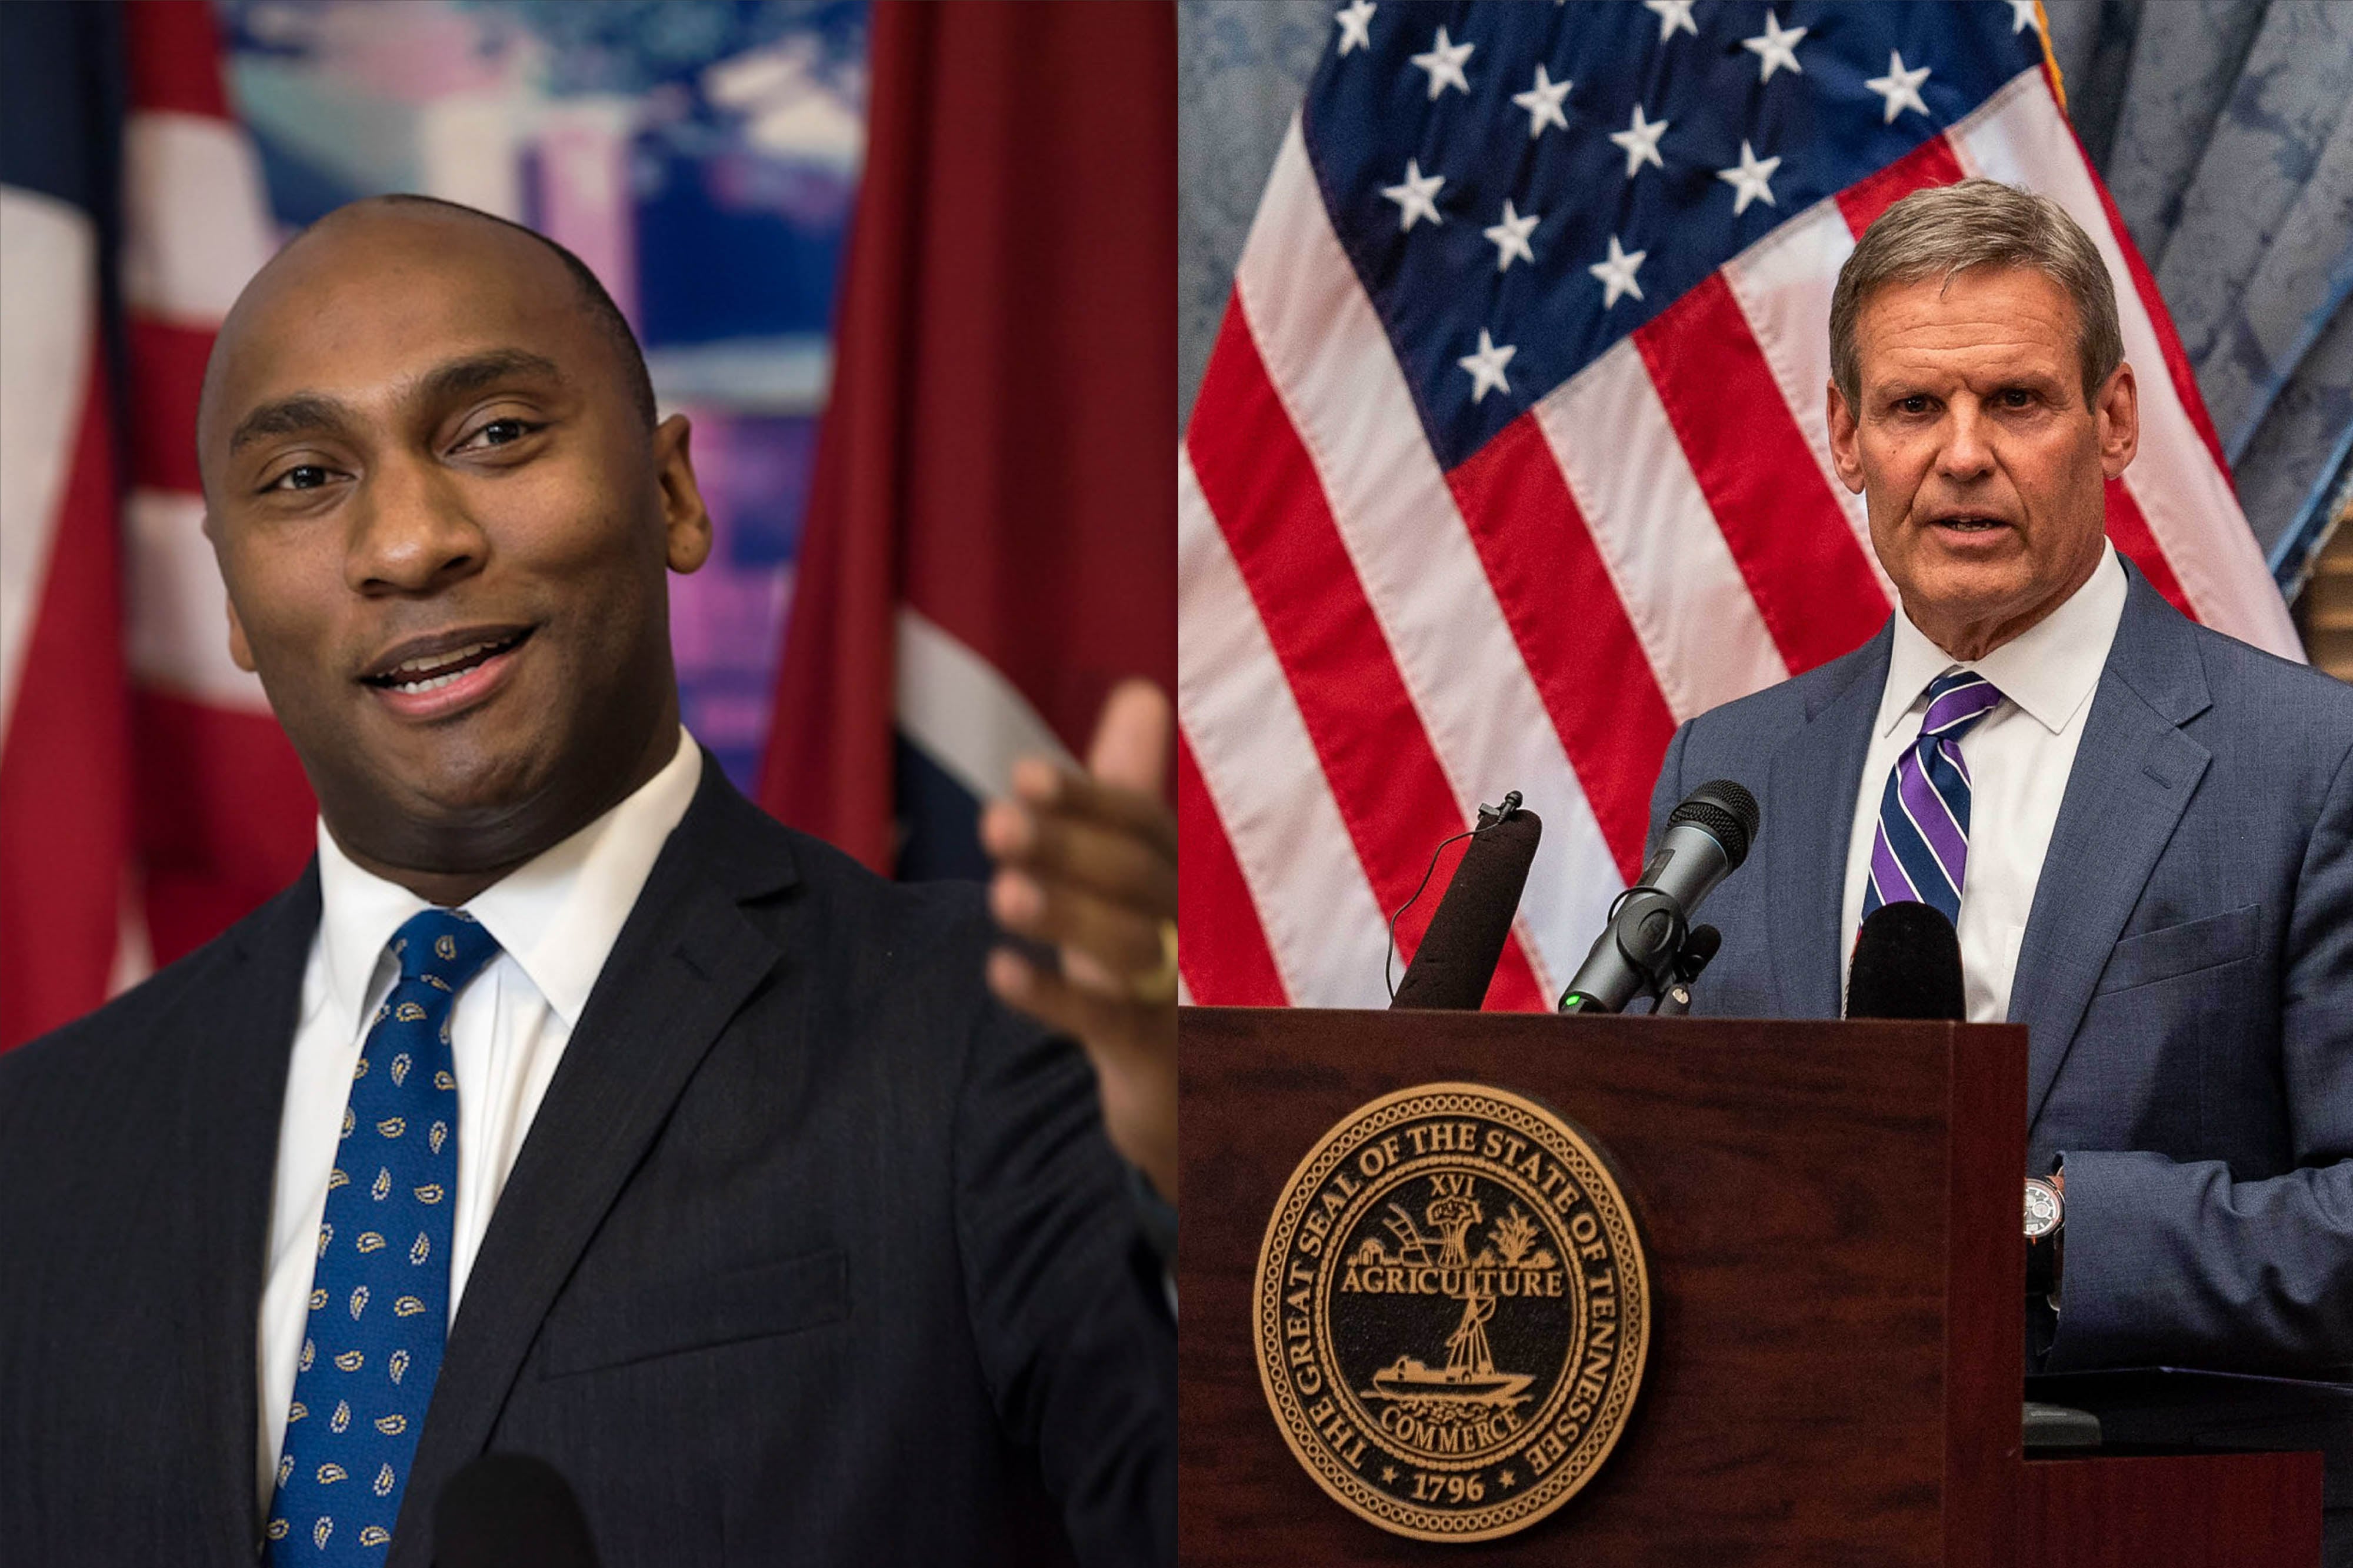 (Left to right) Shelby County Mayor Lee Harris and Tennessee Governor Bill Lee make speeches in two separate photographs.